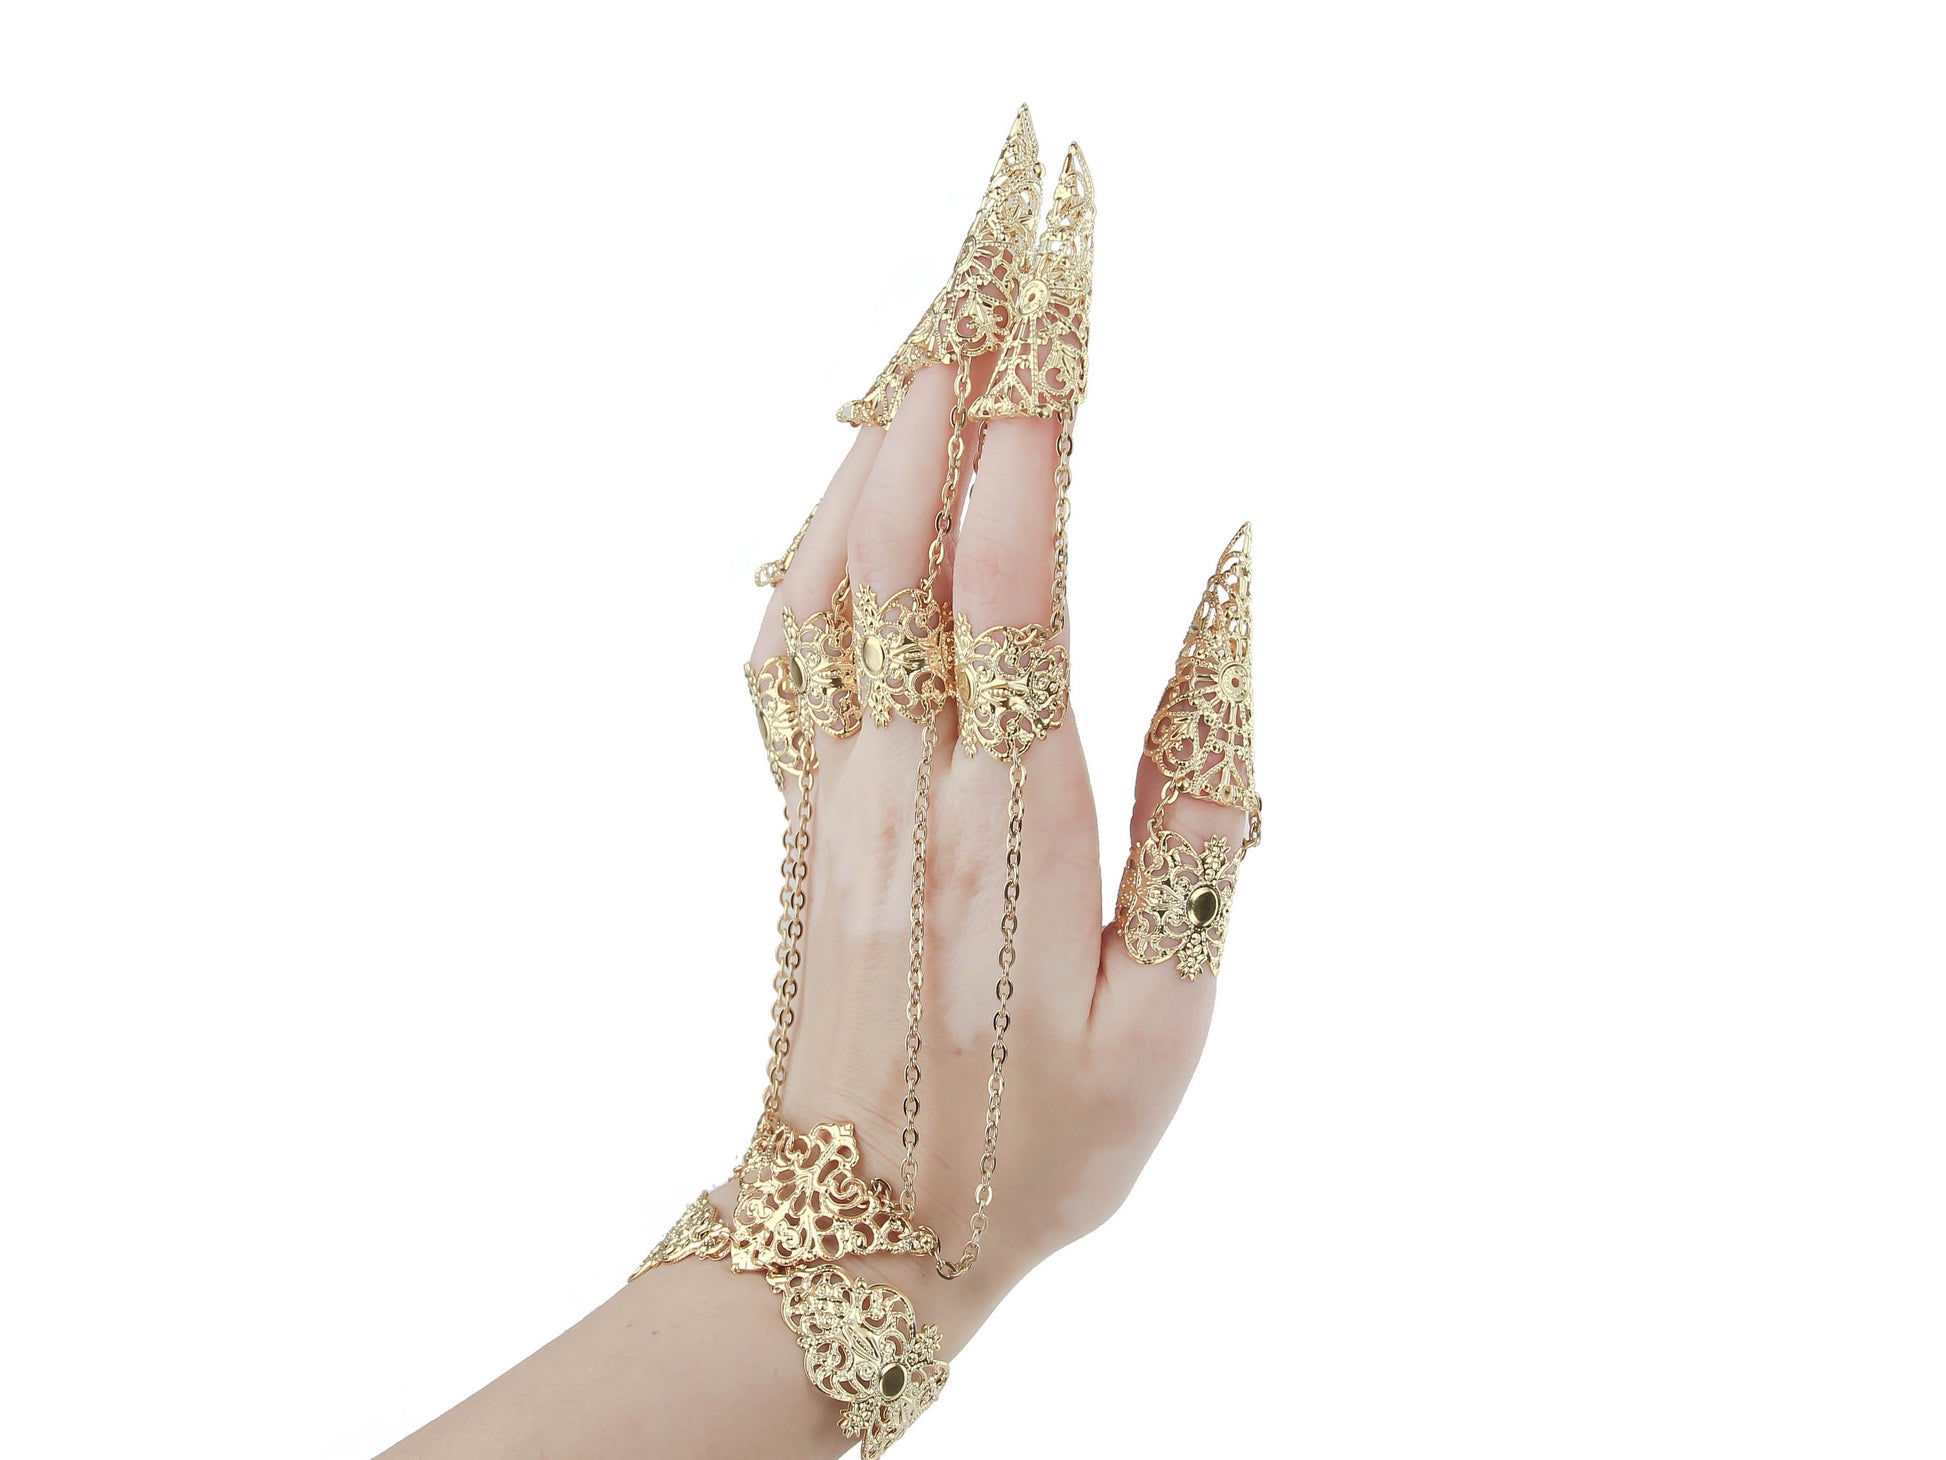 Elegant hand showcasing ornate gold jewelry with extended claw design, connected by delicate chains to the bracelet, embodying a bold gothic and witchy aesthetic ideal for statement accessorizing.